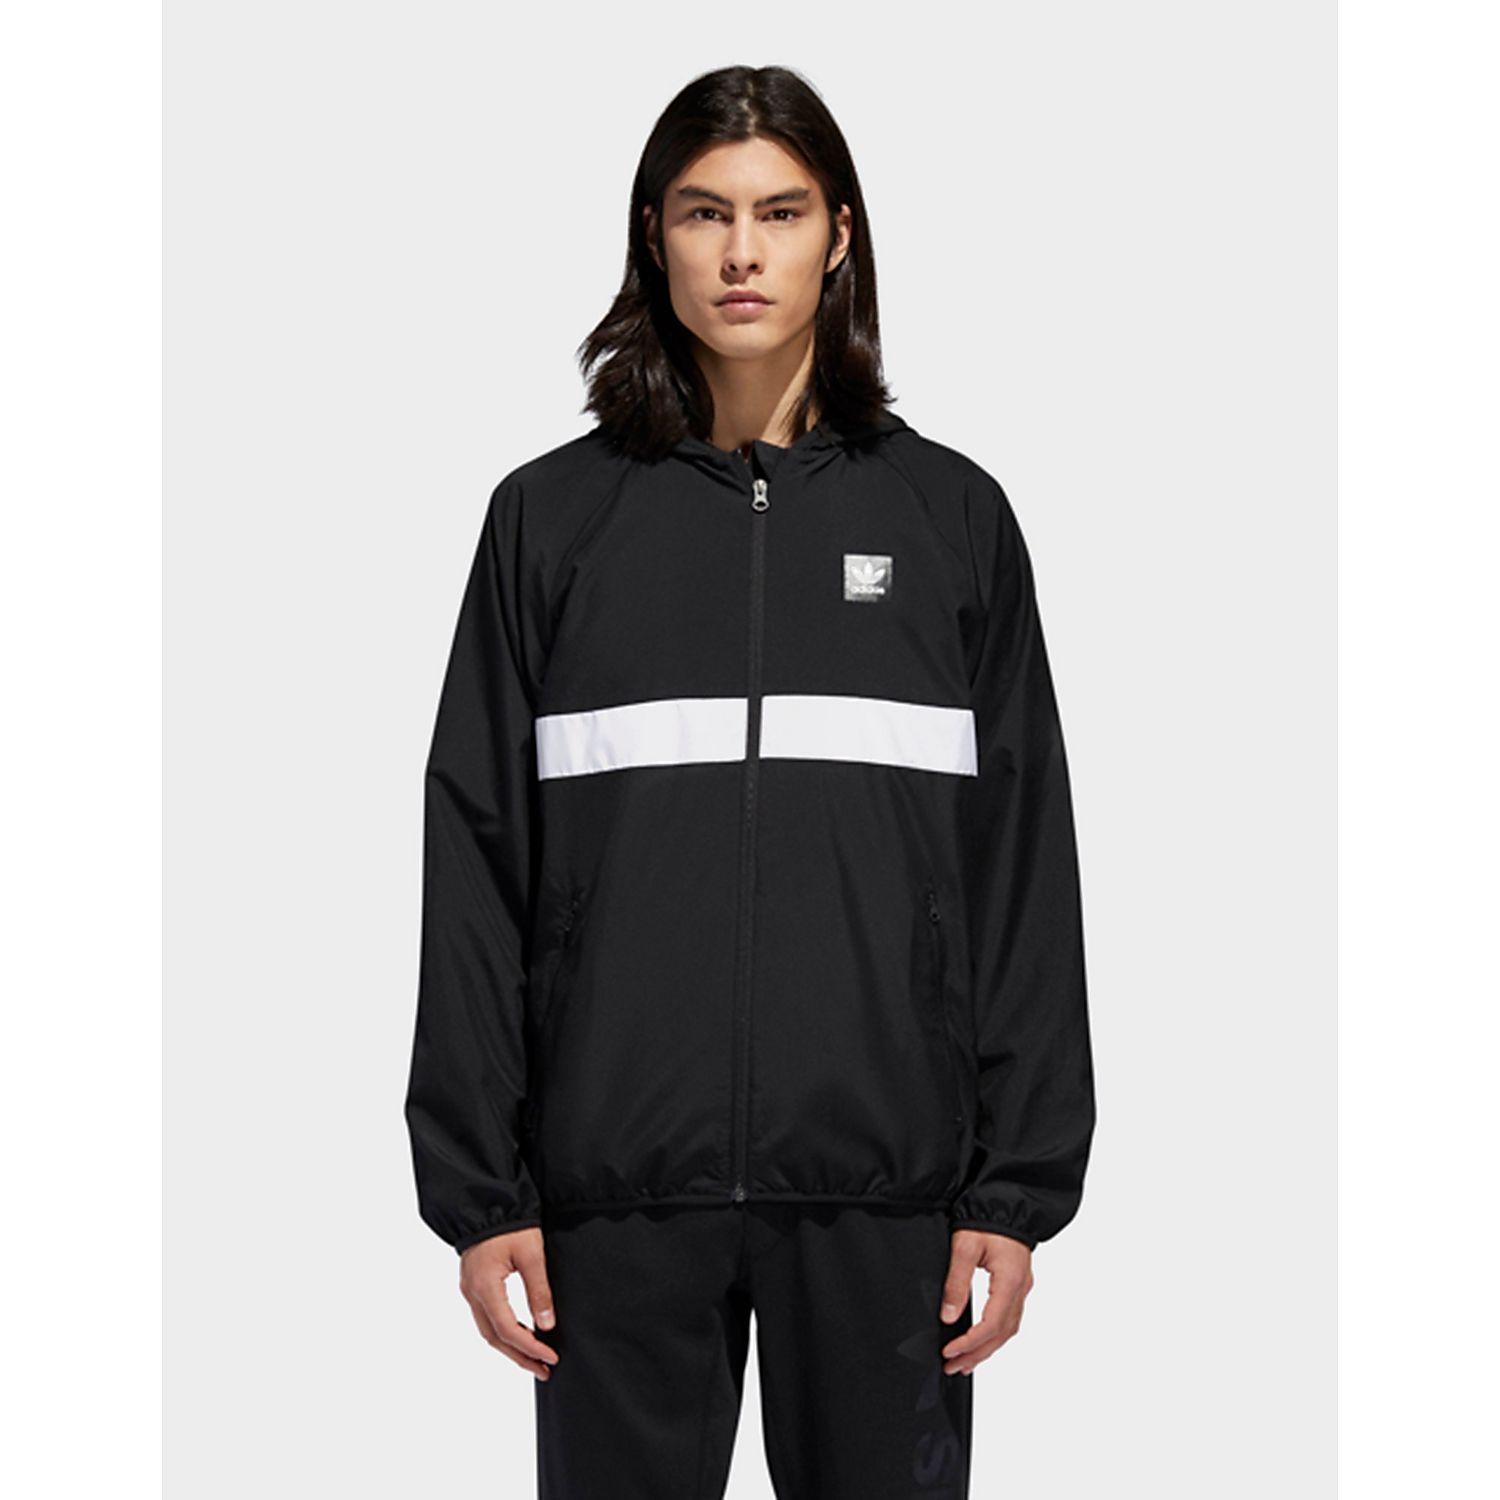 adidas bb packable wind jacket